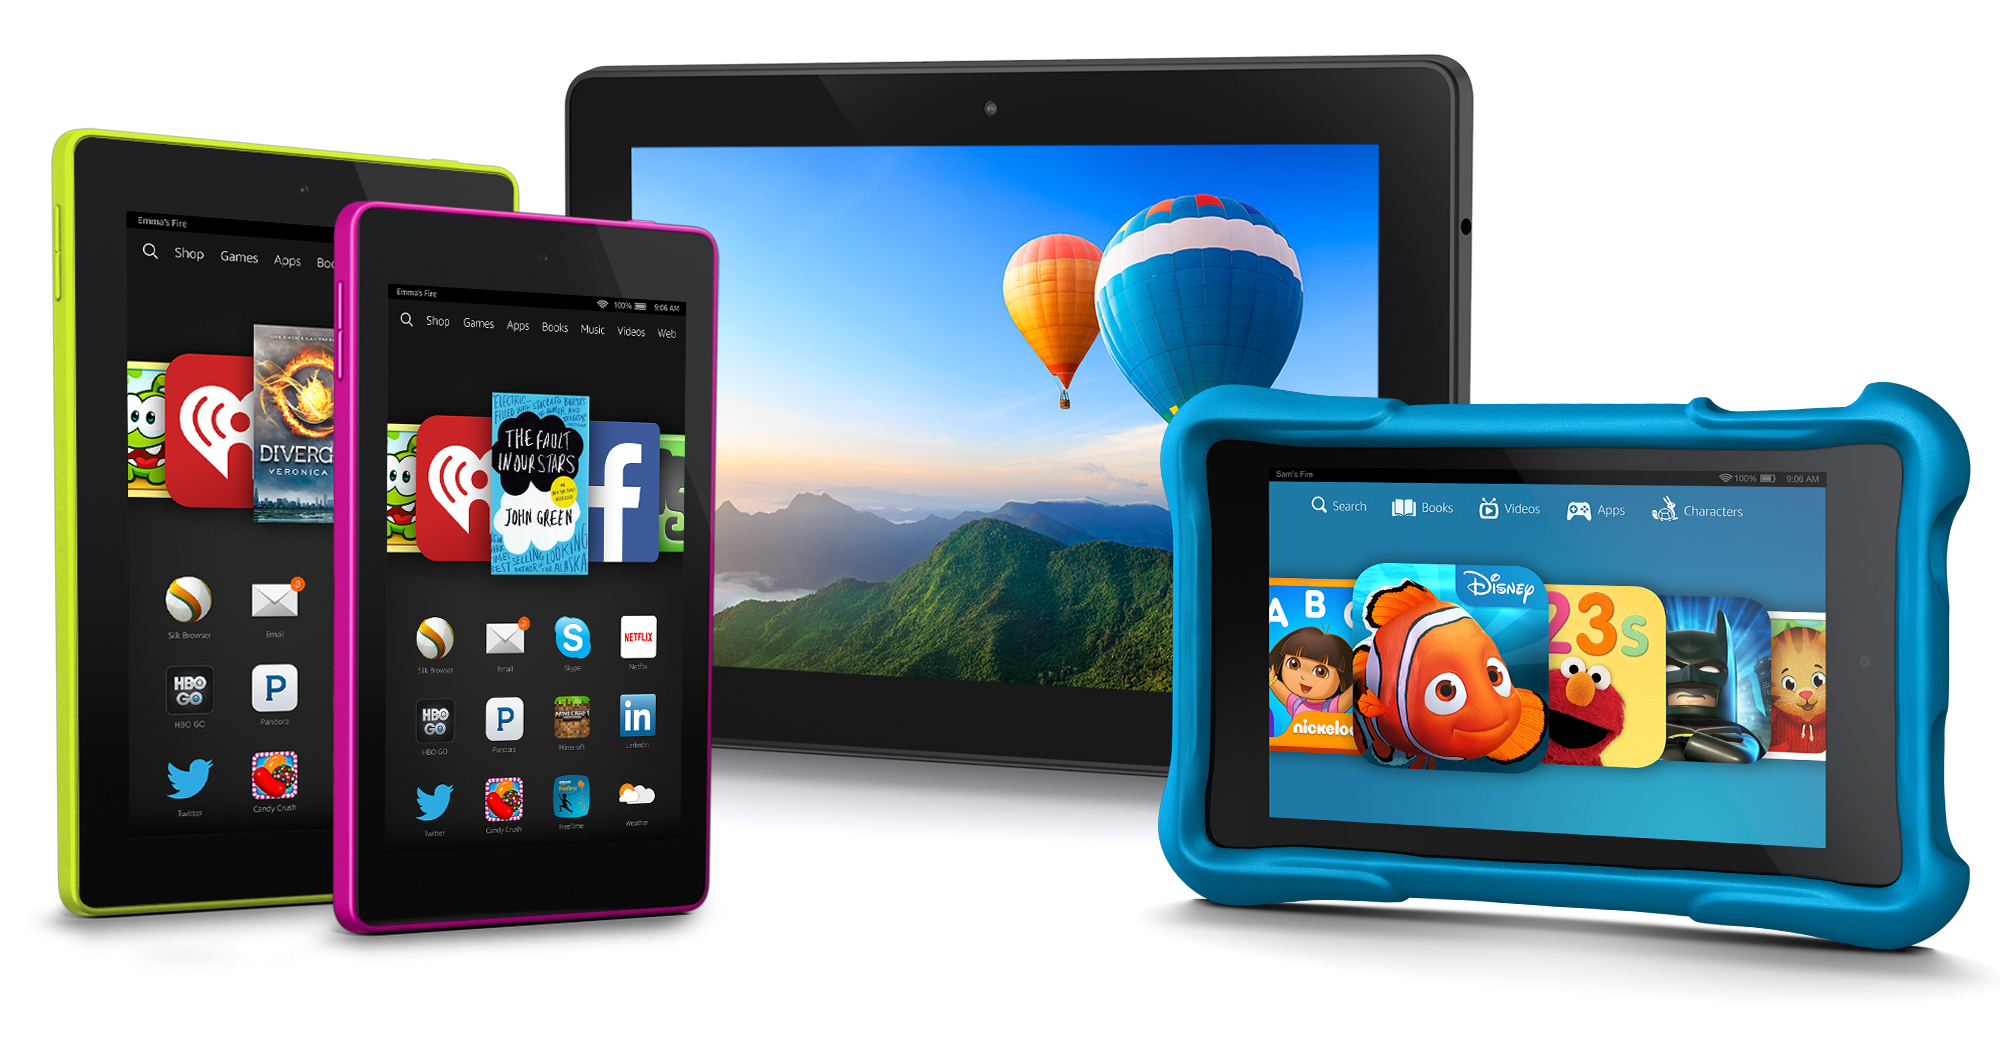 Amazon's 4th generation of tablets announced, new Kindle Fire HDX ...